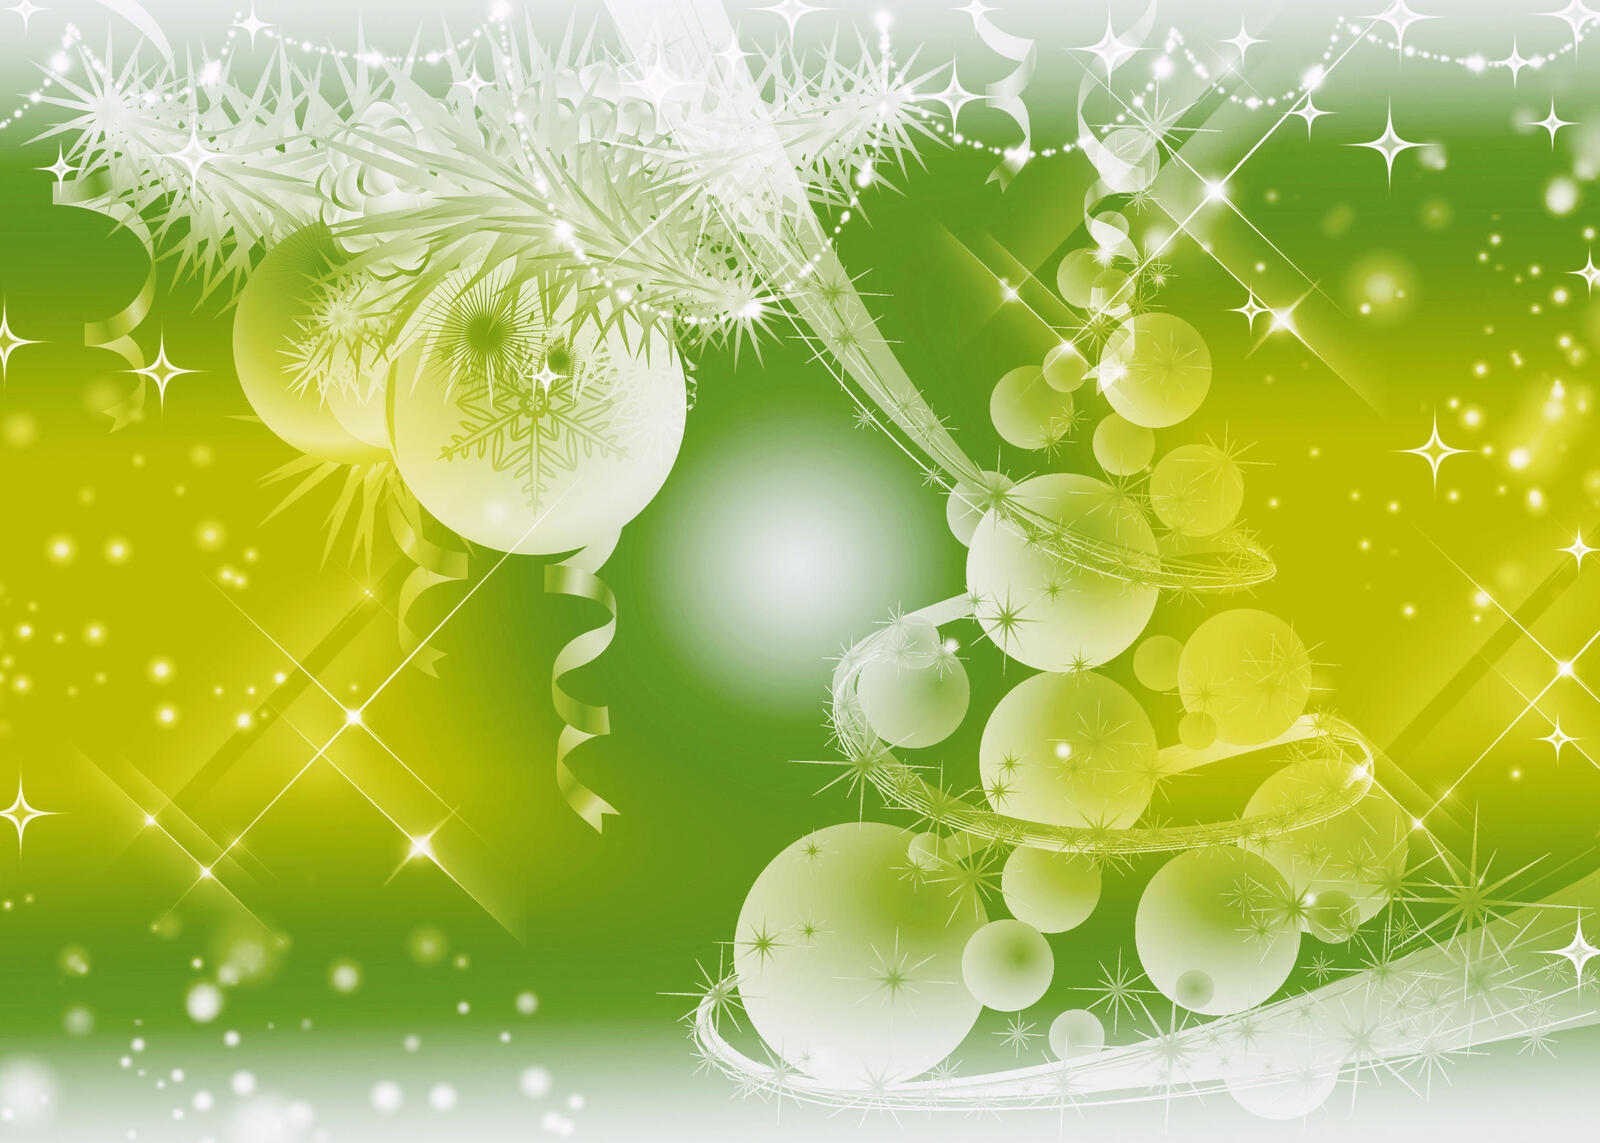 Wallpapers abstraction design new year on the desktop